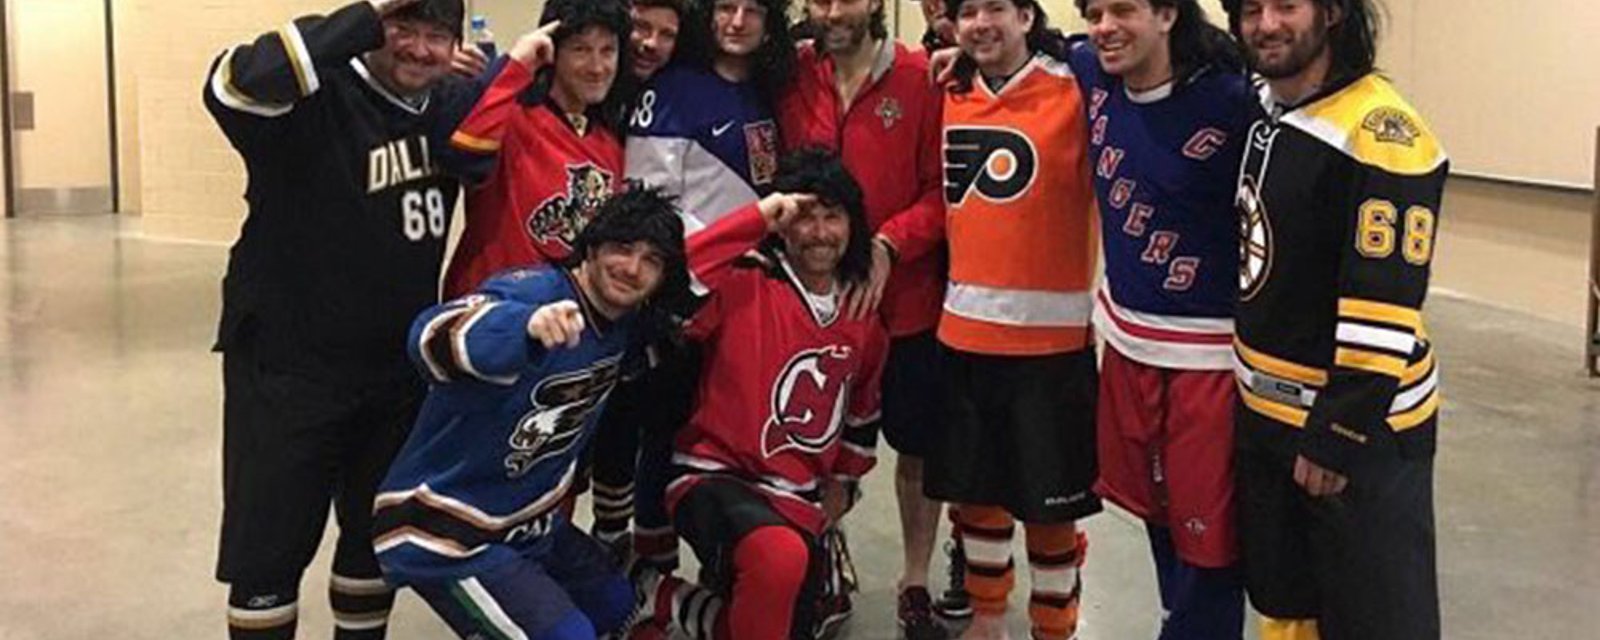 Tragedy strikes the tight group of friends known as 'The Traveling Jagrs'